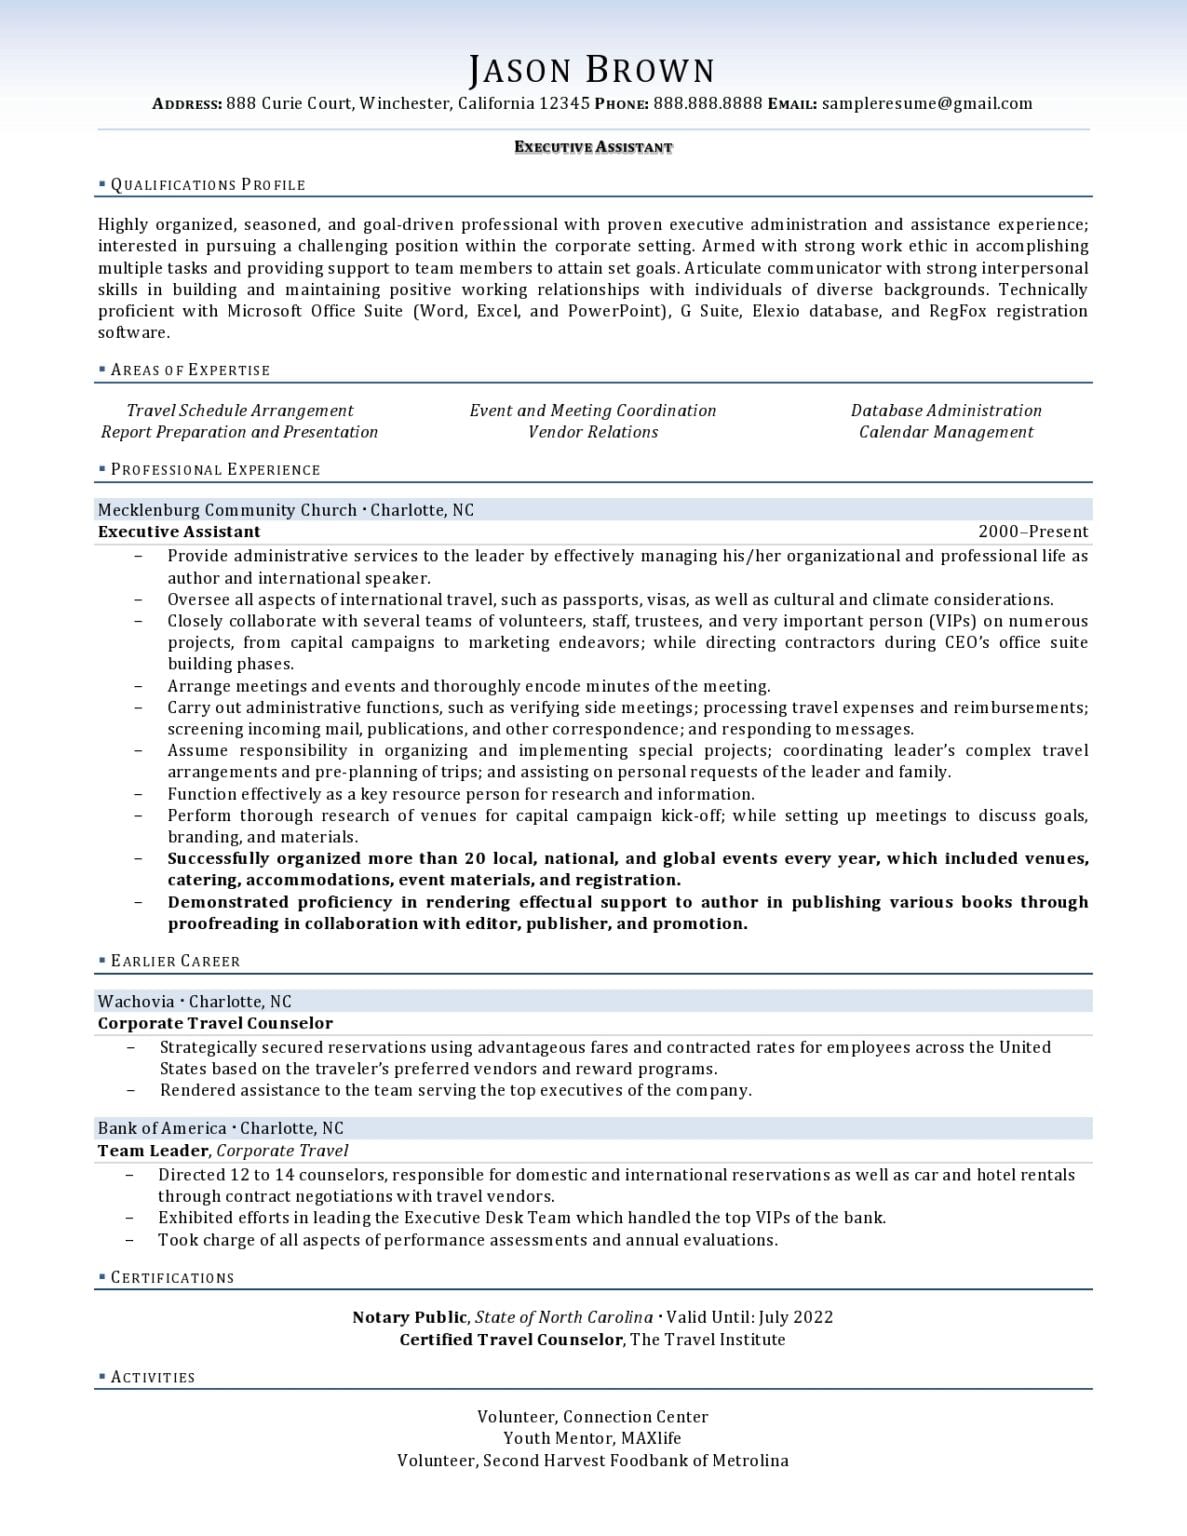 executive assistant resume example objective